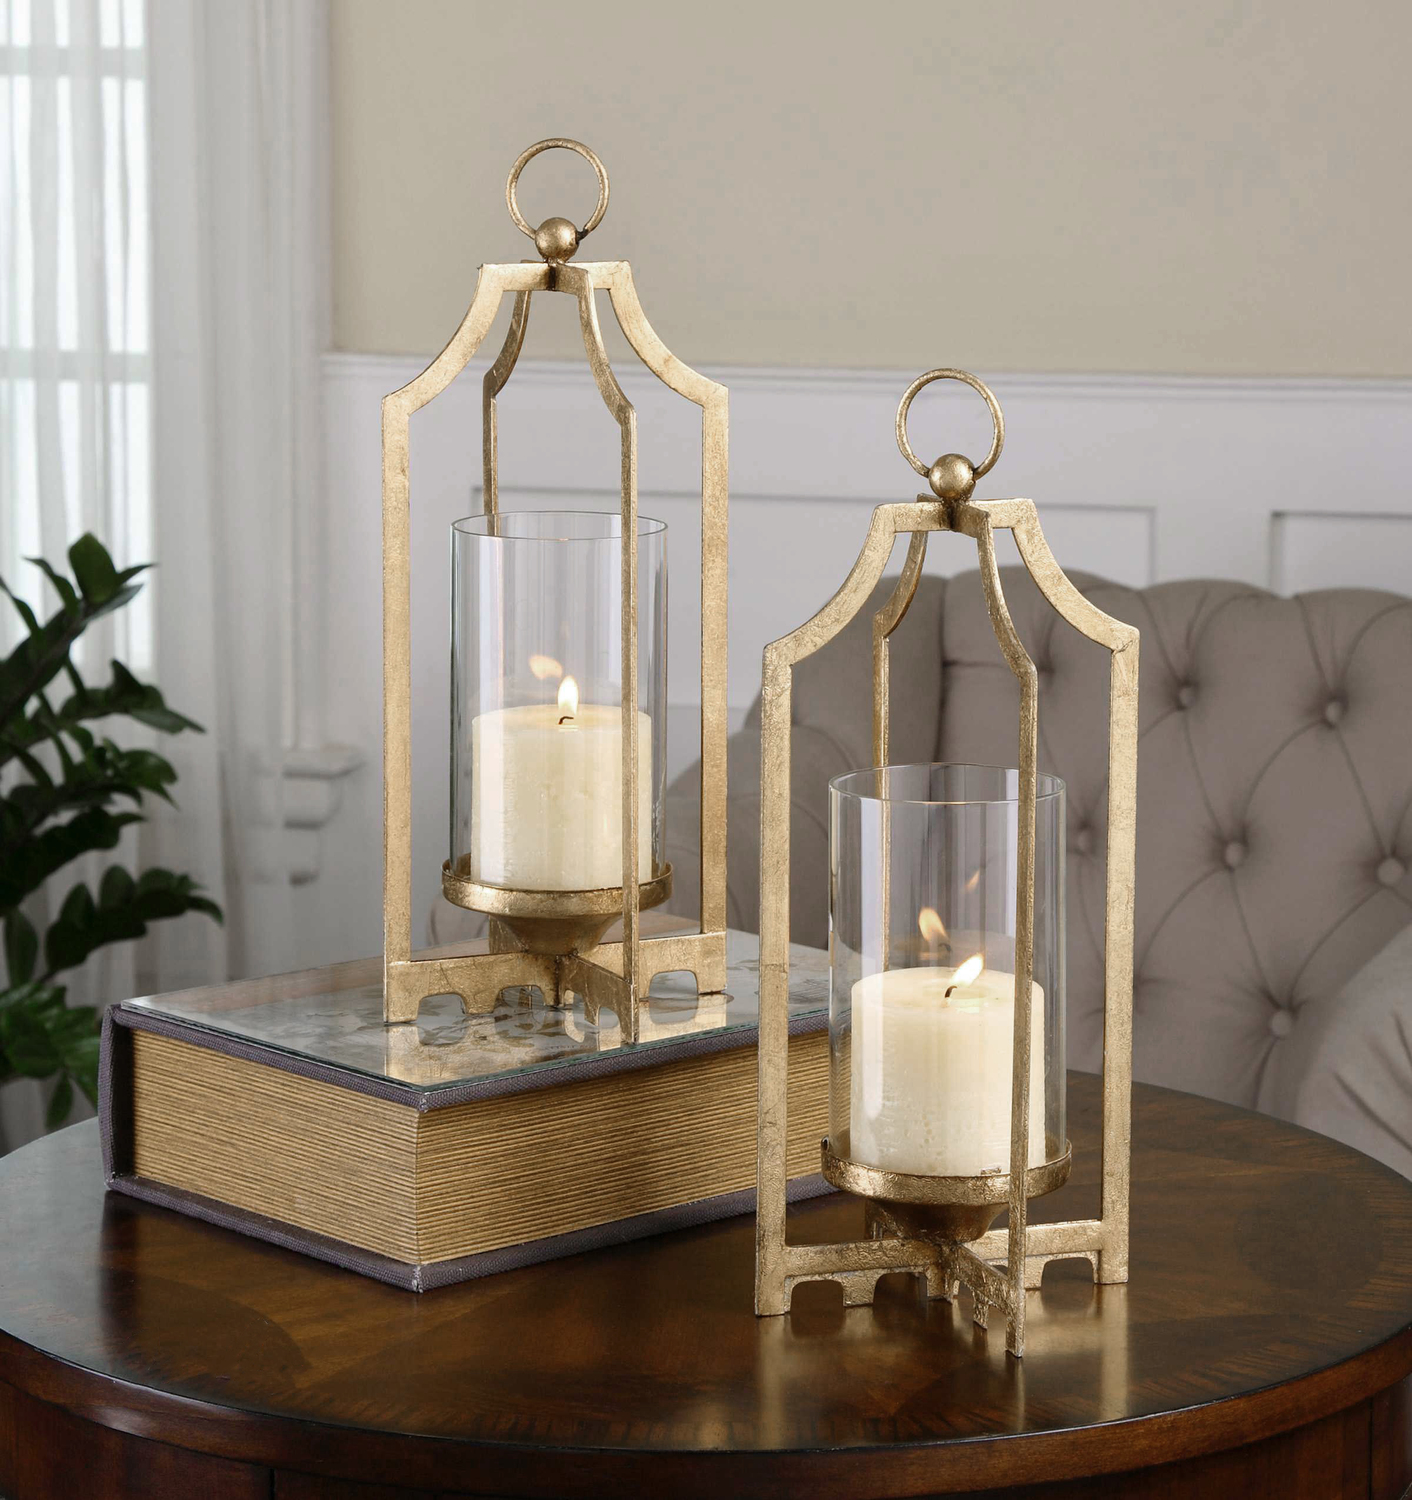 pillar candle holders set of 2 Uttermost Candleholders Bright Metallic Gold With Clear Glass Globes And Distressed White Candles.